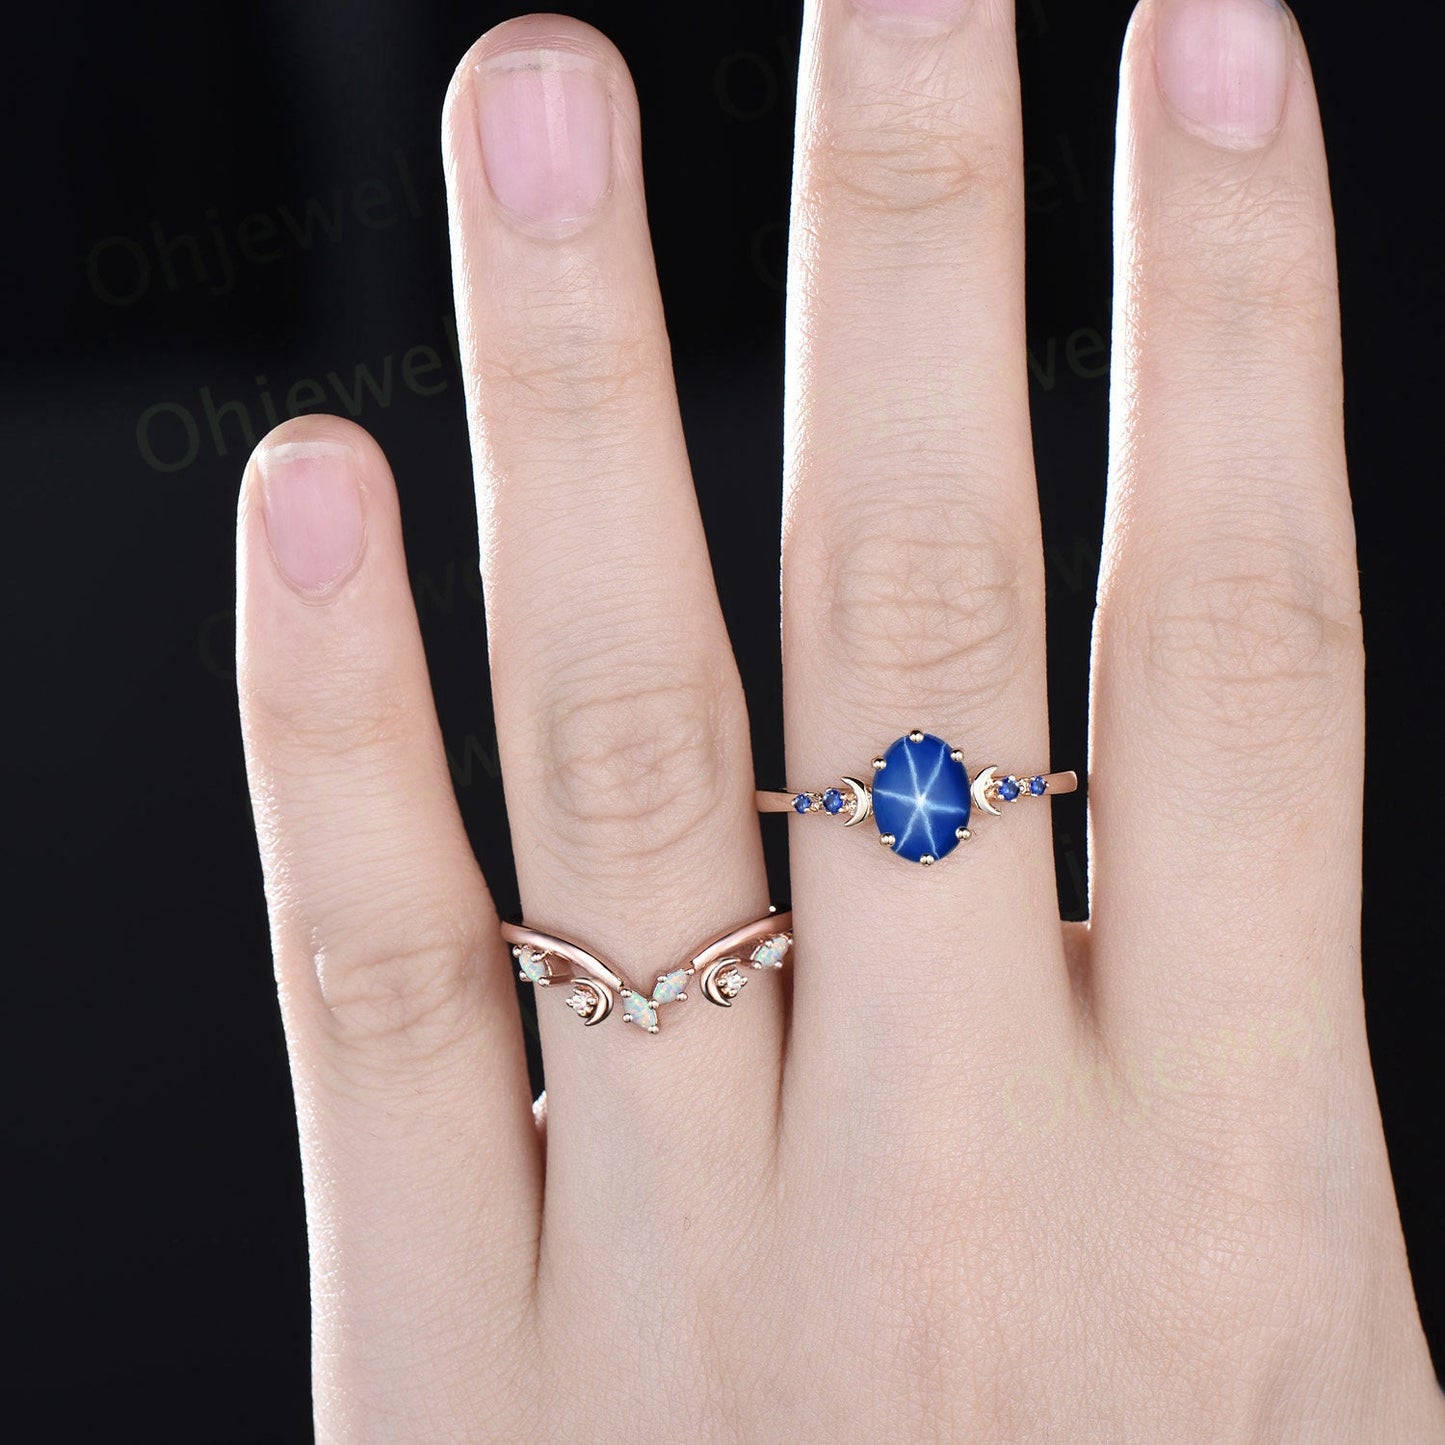 Oval star sapphire ring moon opal wedding ring set art deco five stone unique engagement ring women yellow gold anniversary ring gift